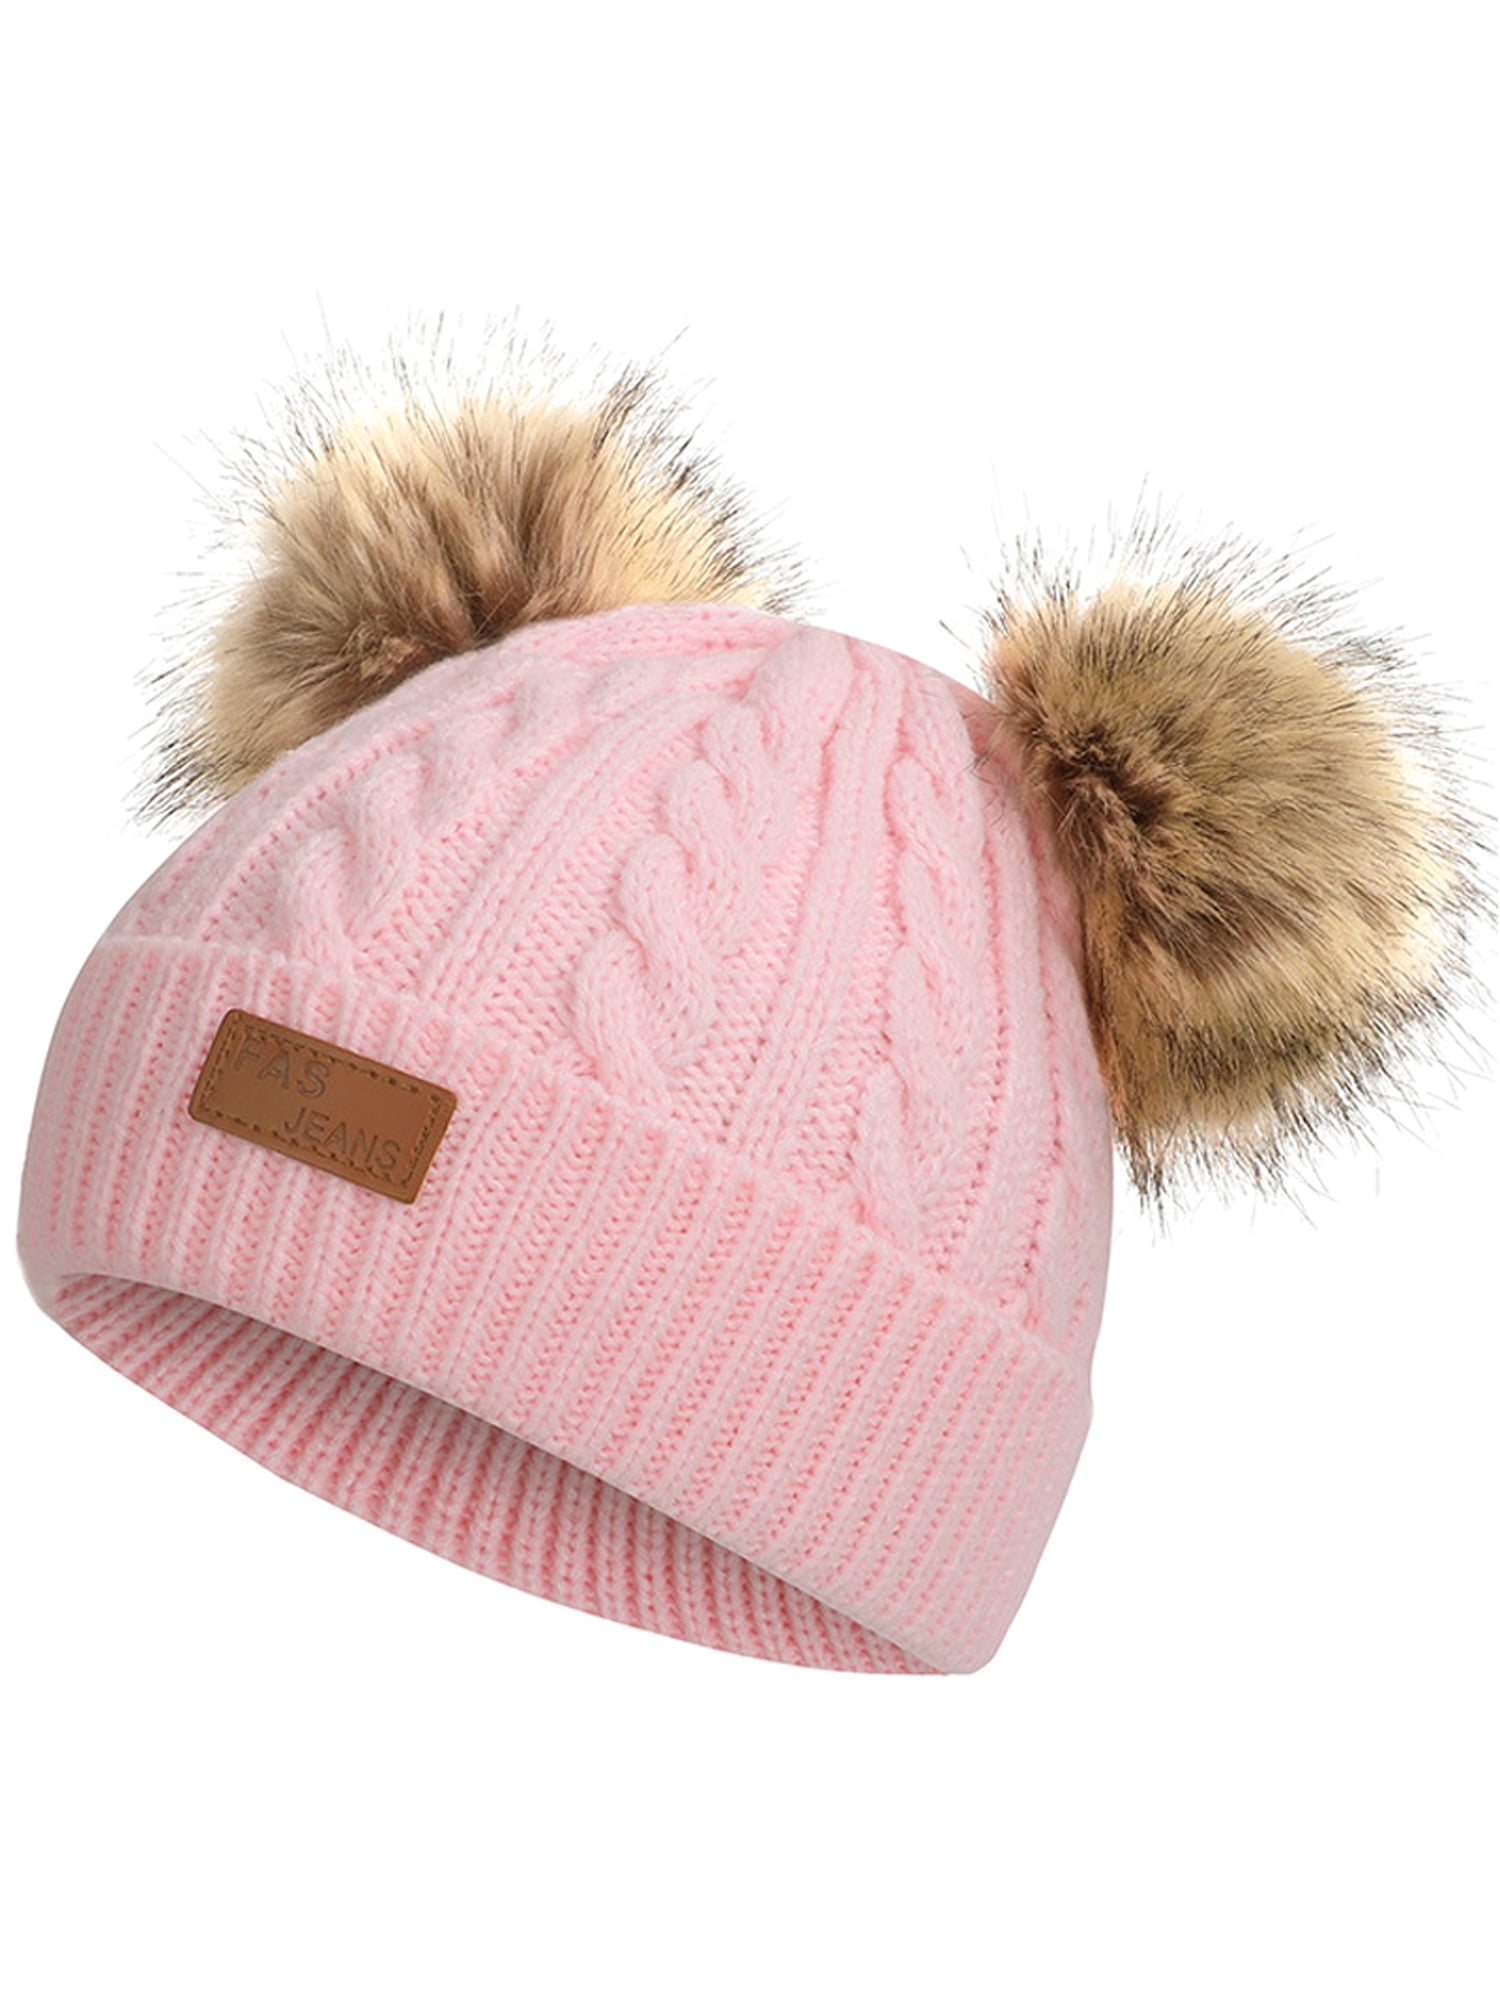 BABY KNITTED POM POM HAT BOBBLE PINK BLUE WHITE GREY CABLE BOYS GIRLS WINTER 0-6 